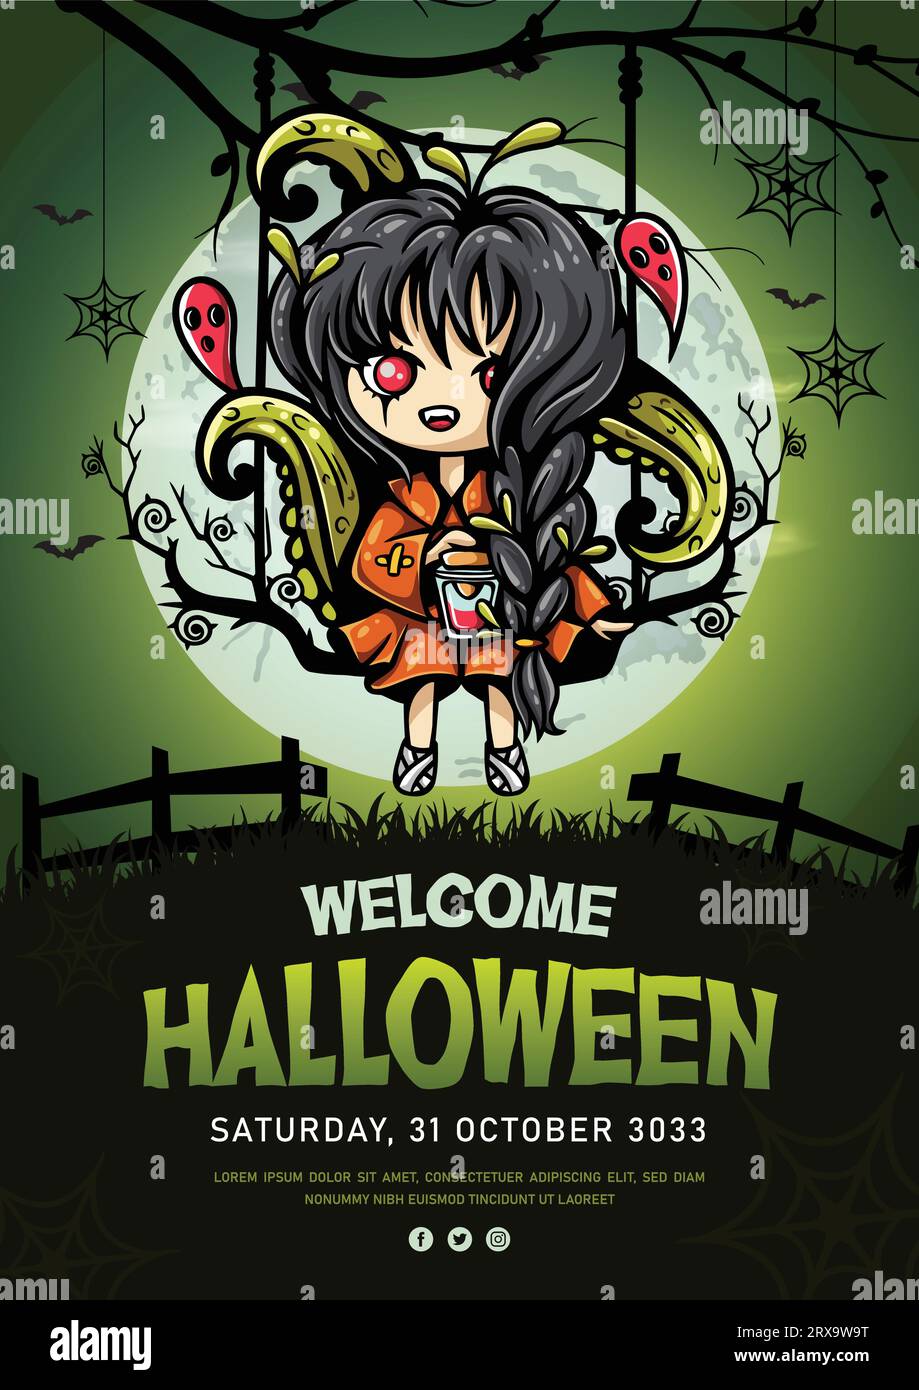 Horror fantasy halloween poster and flyer design with cute ghost girl illustration Stock Vector